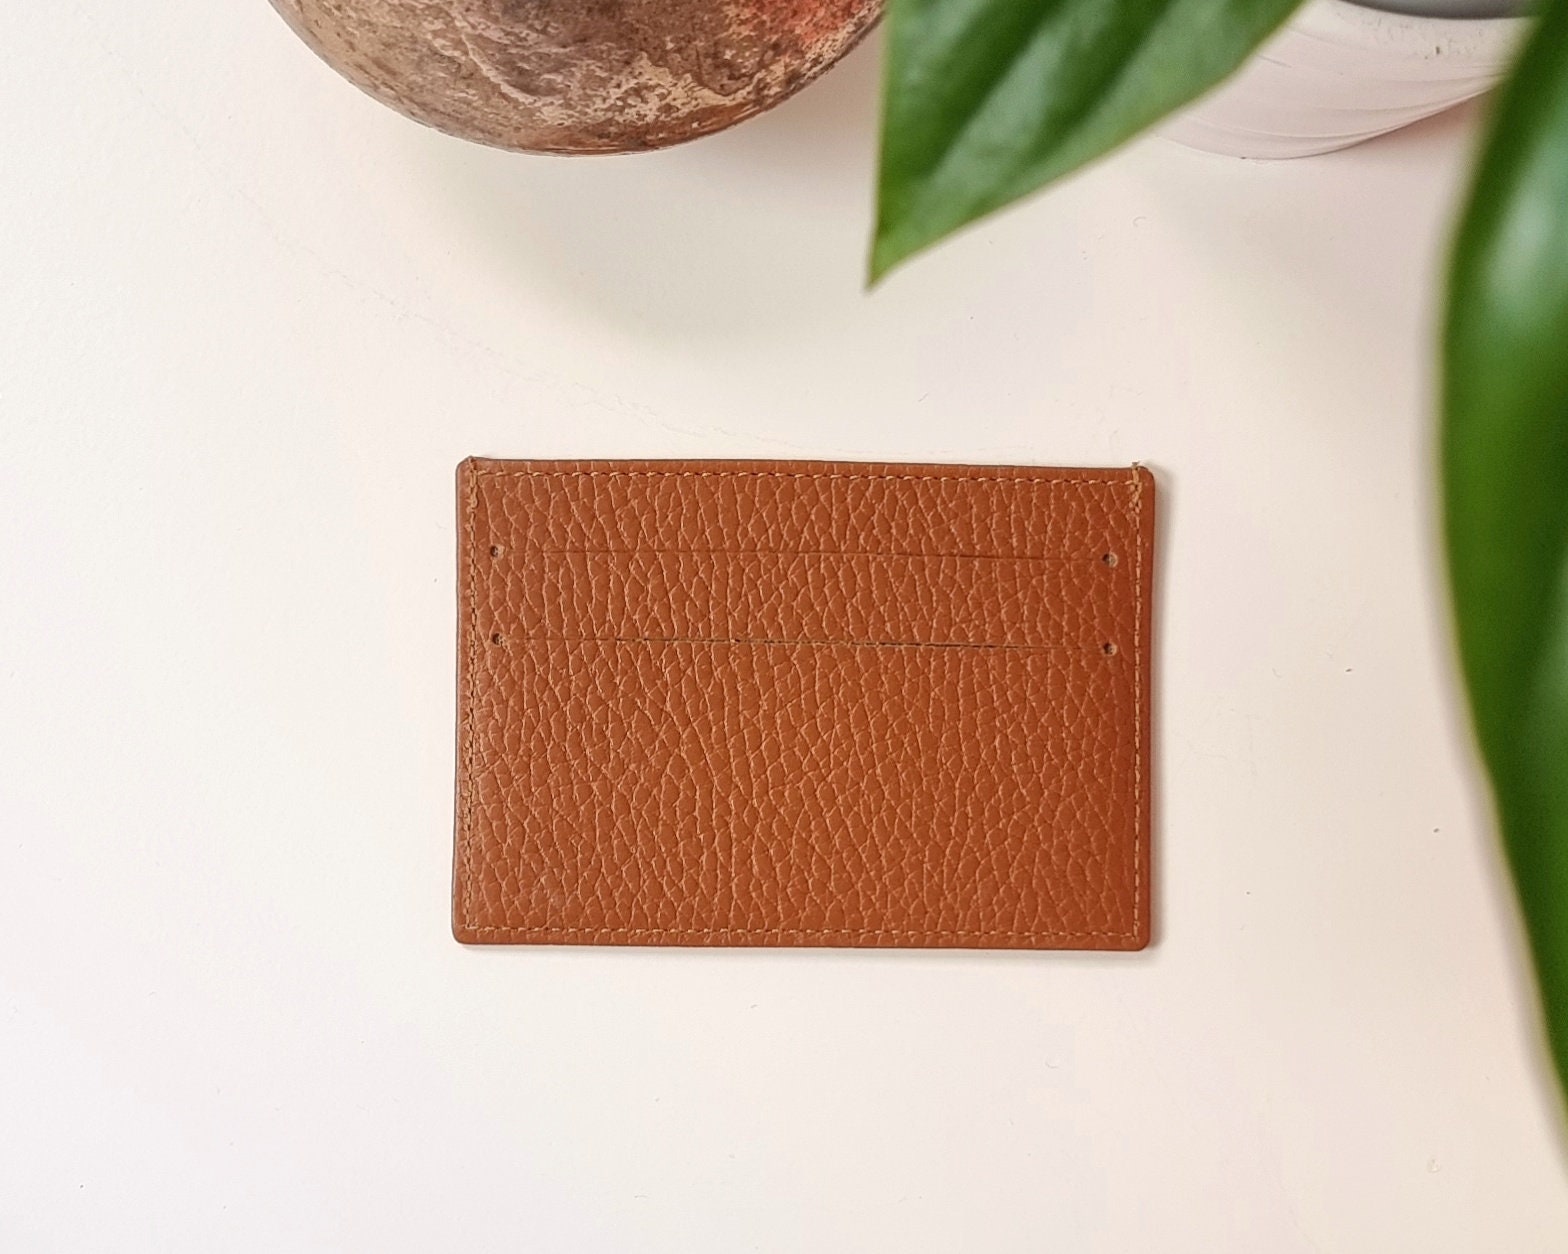 Card Holder H27 - Women - Small Leather Goods